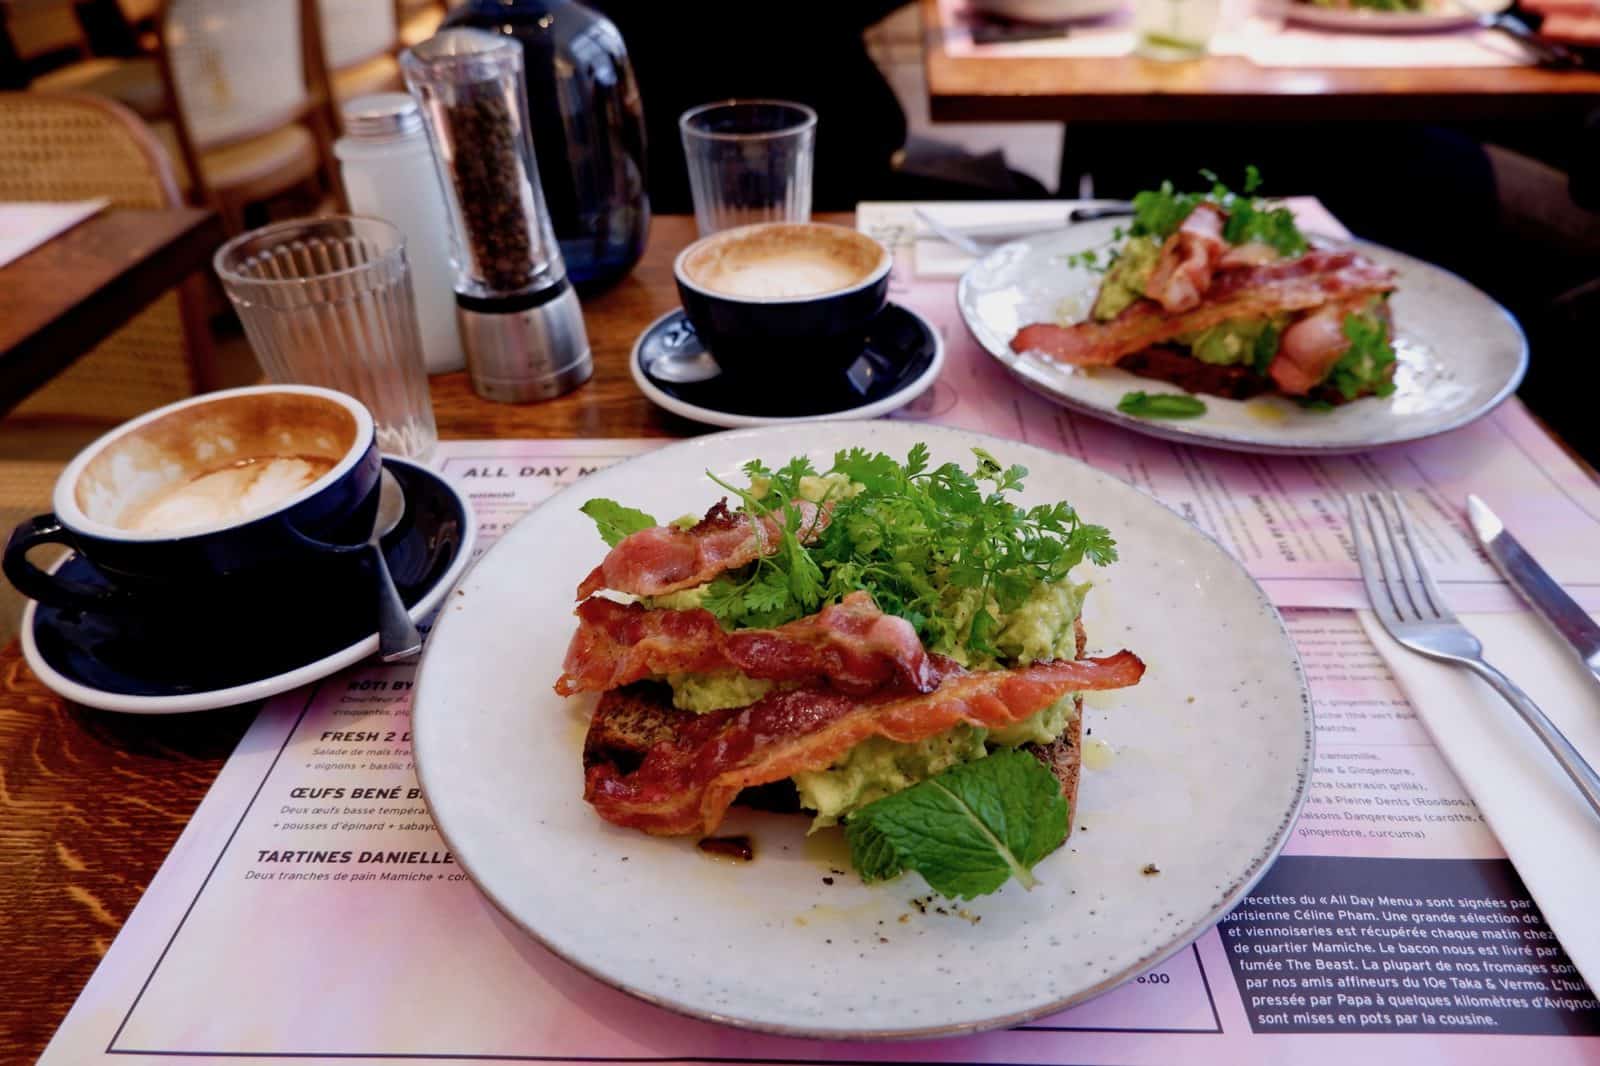 Coffee and avocado toast with crispy bacon brunch at Papilles coffee shop in Paris.